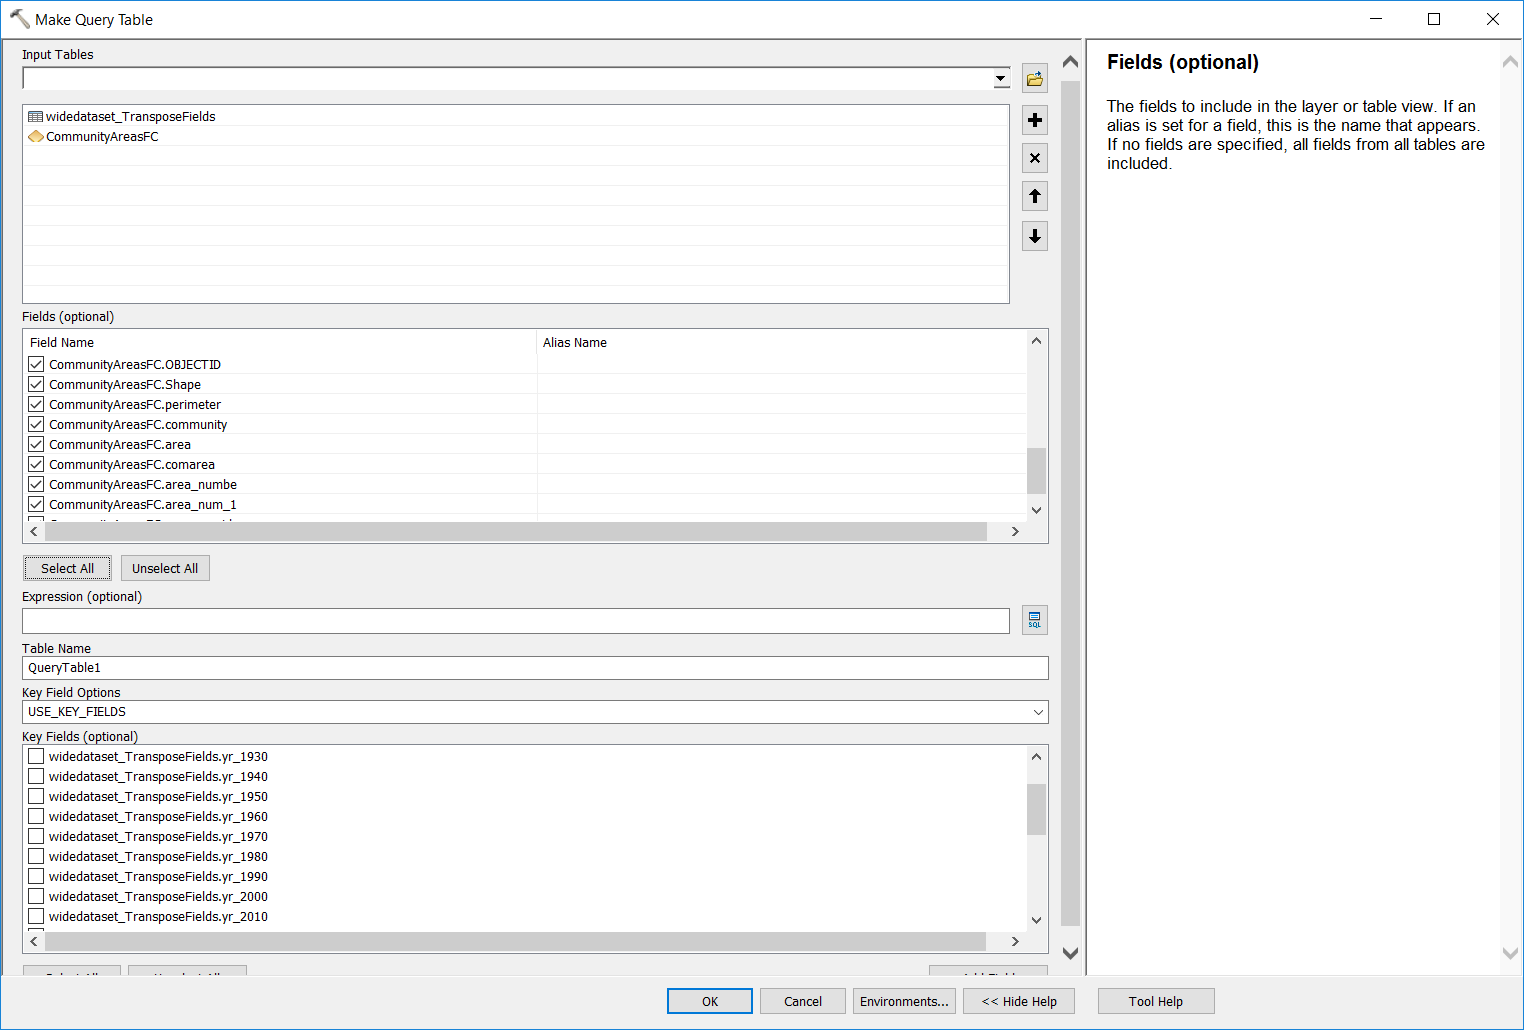 Make Query Table: SQL not working - Esri Community